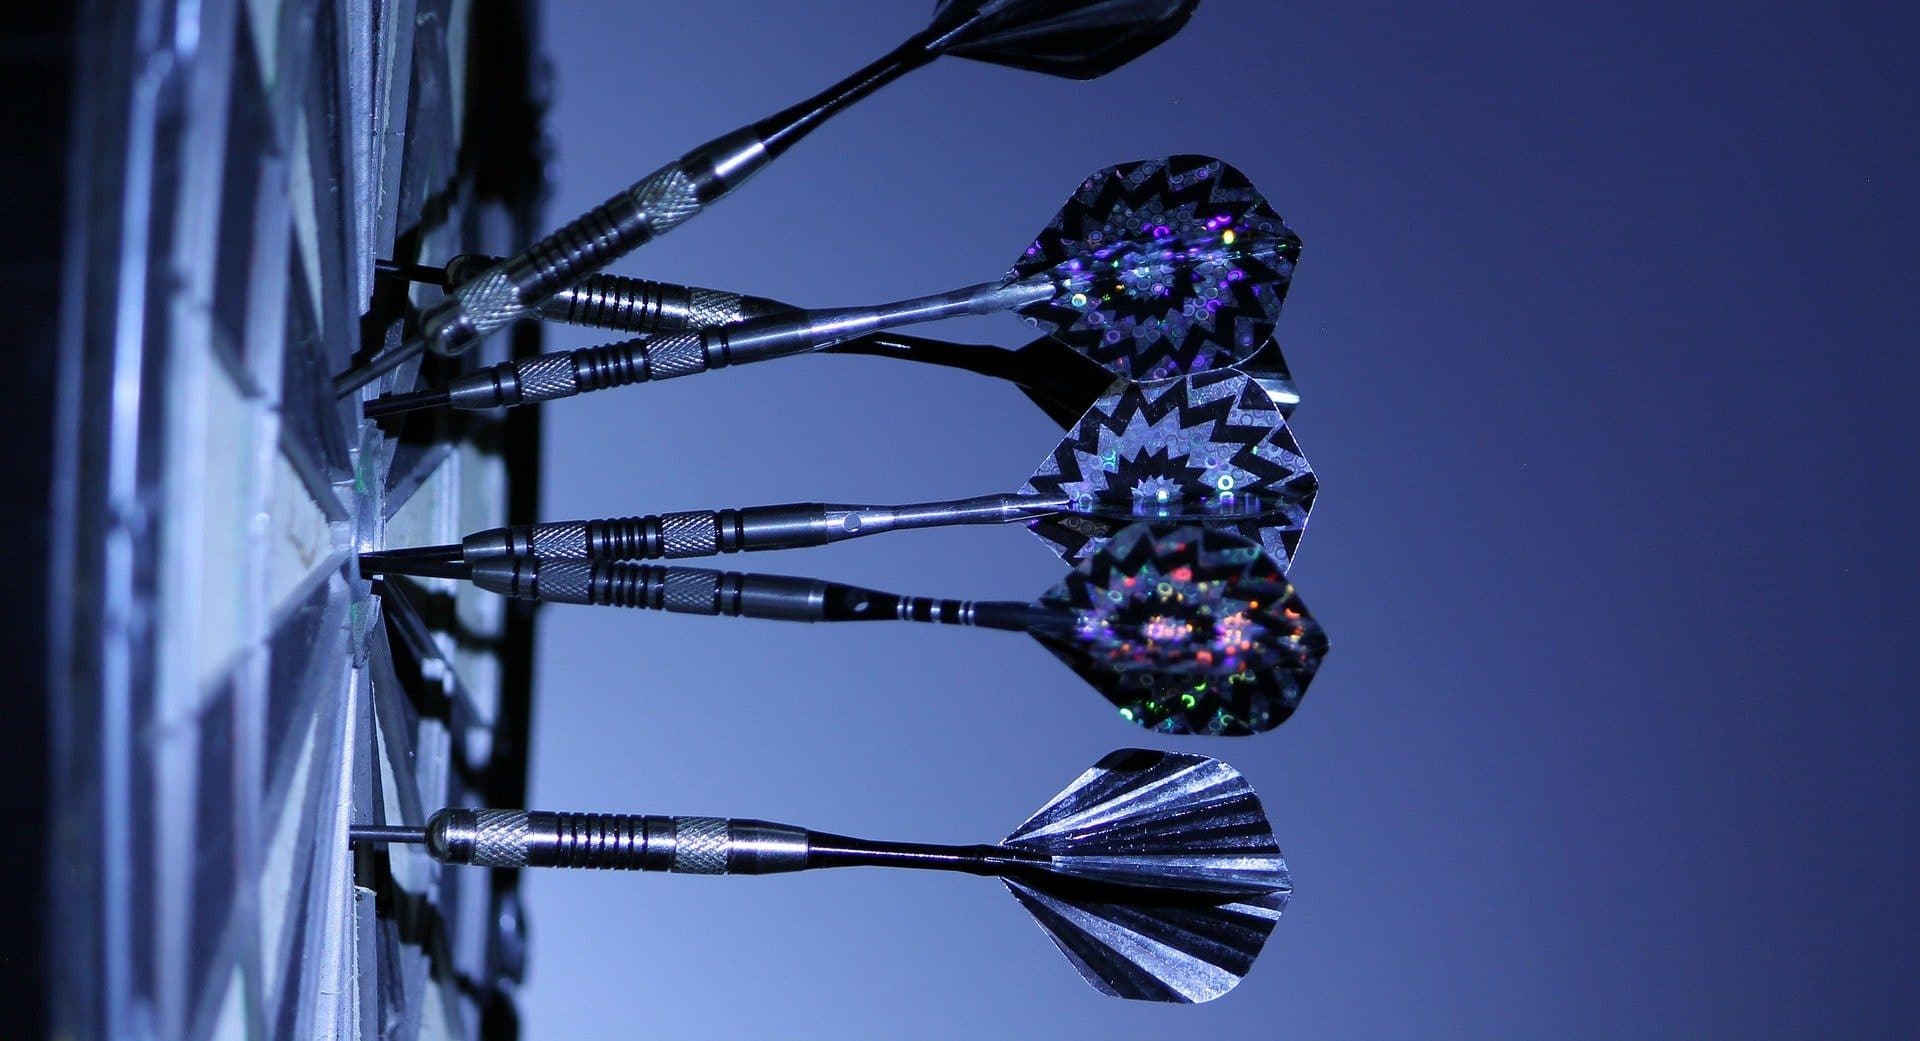 You must be on target with your loyalty program KPIs just as these darts hit their respective target.